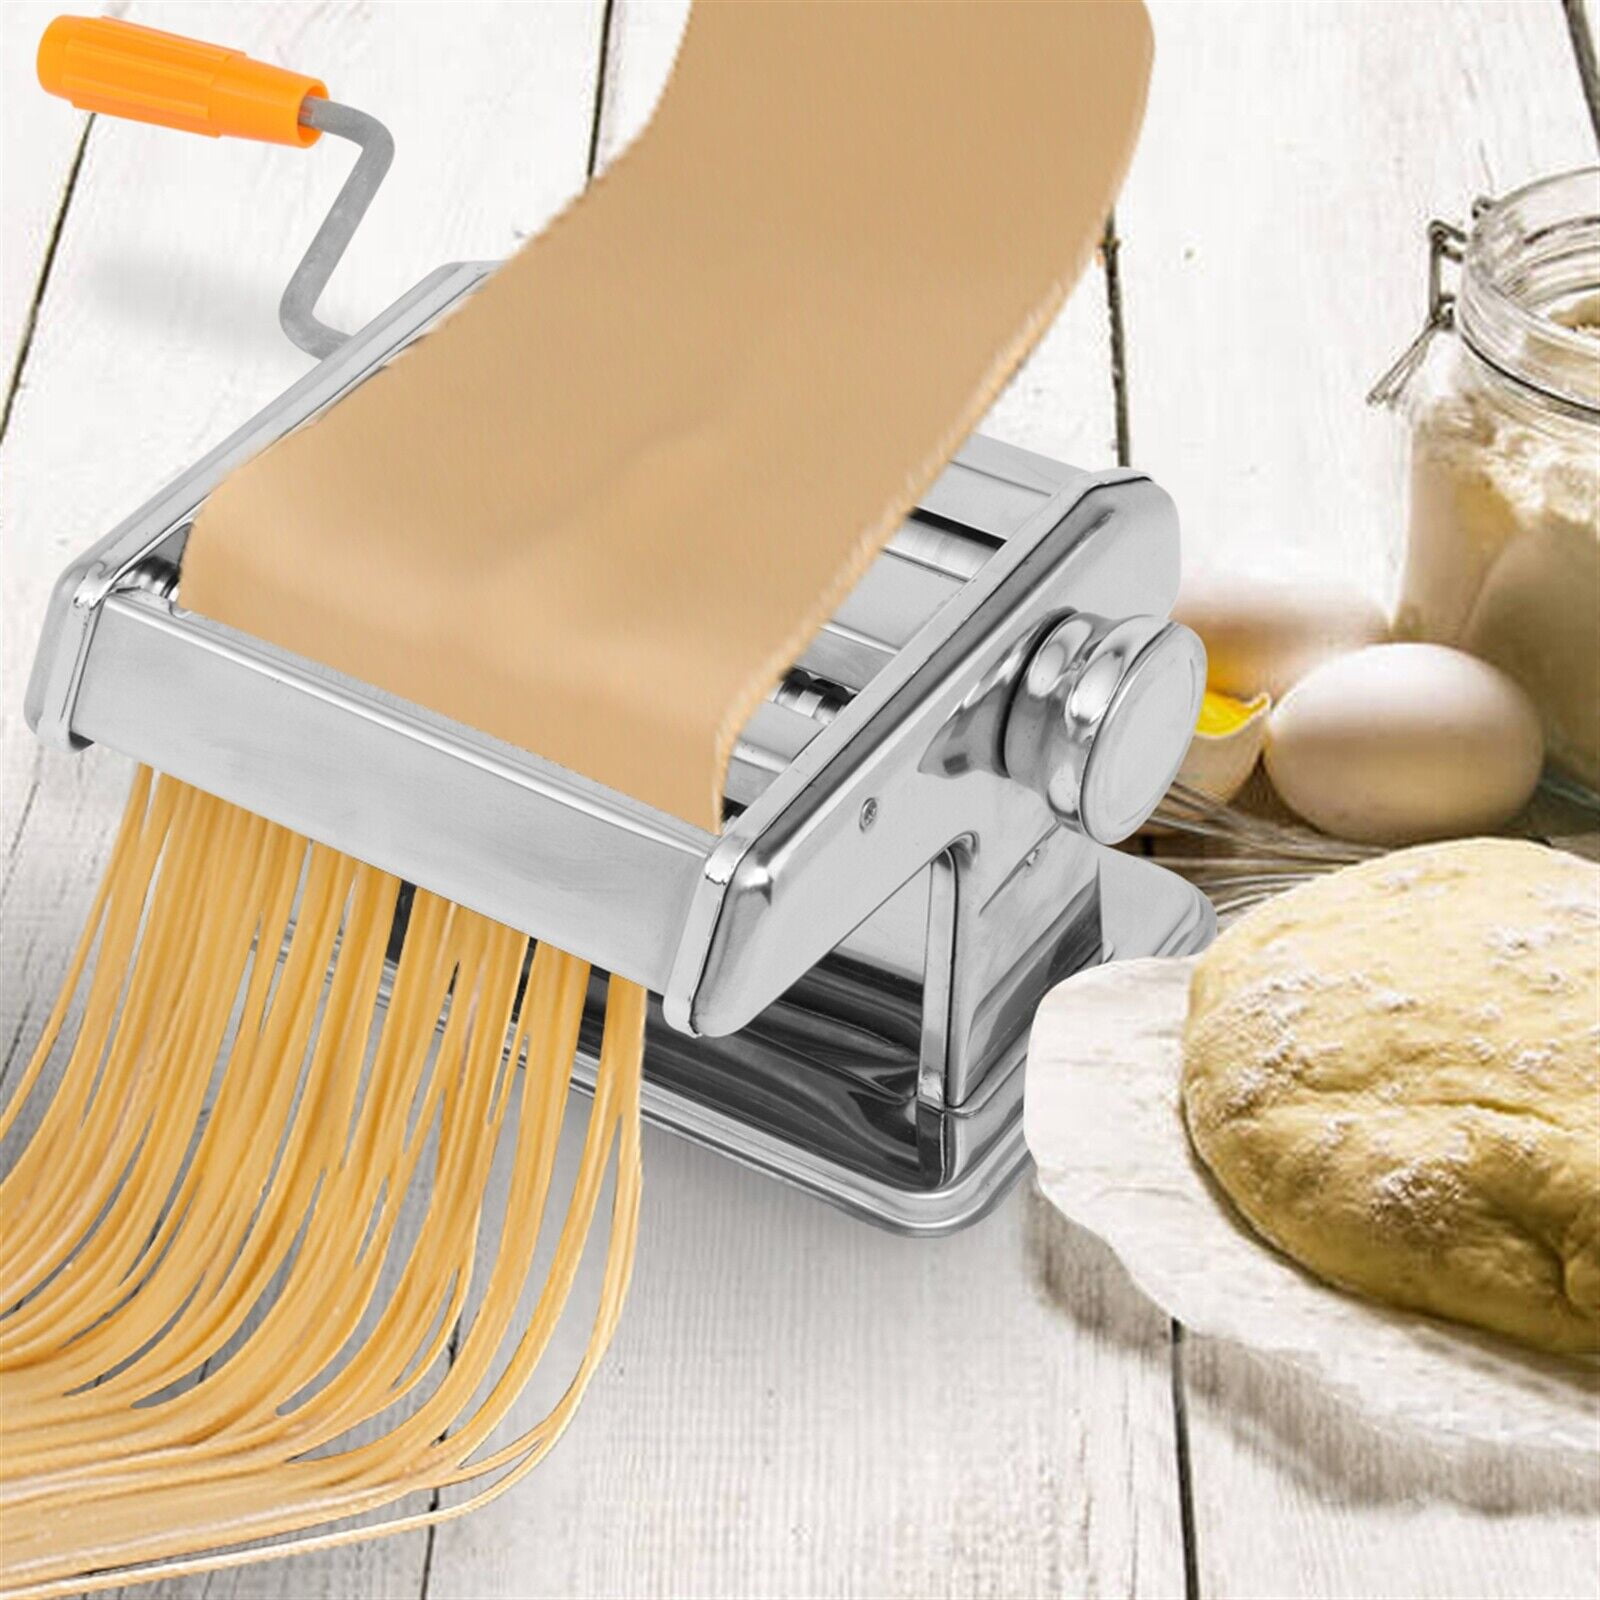 Laatste Passend Prestatie Pasta Machine, Roller Pasta Maker, Adjustable Thickness Settings Noodles  Maker with Washable Rollers and Cutter,Perfect for Spaghetti, Fettuccini,  Lasagna or Dumpling Skins - Walmart.com